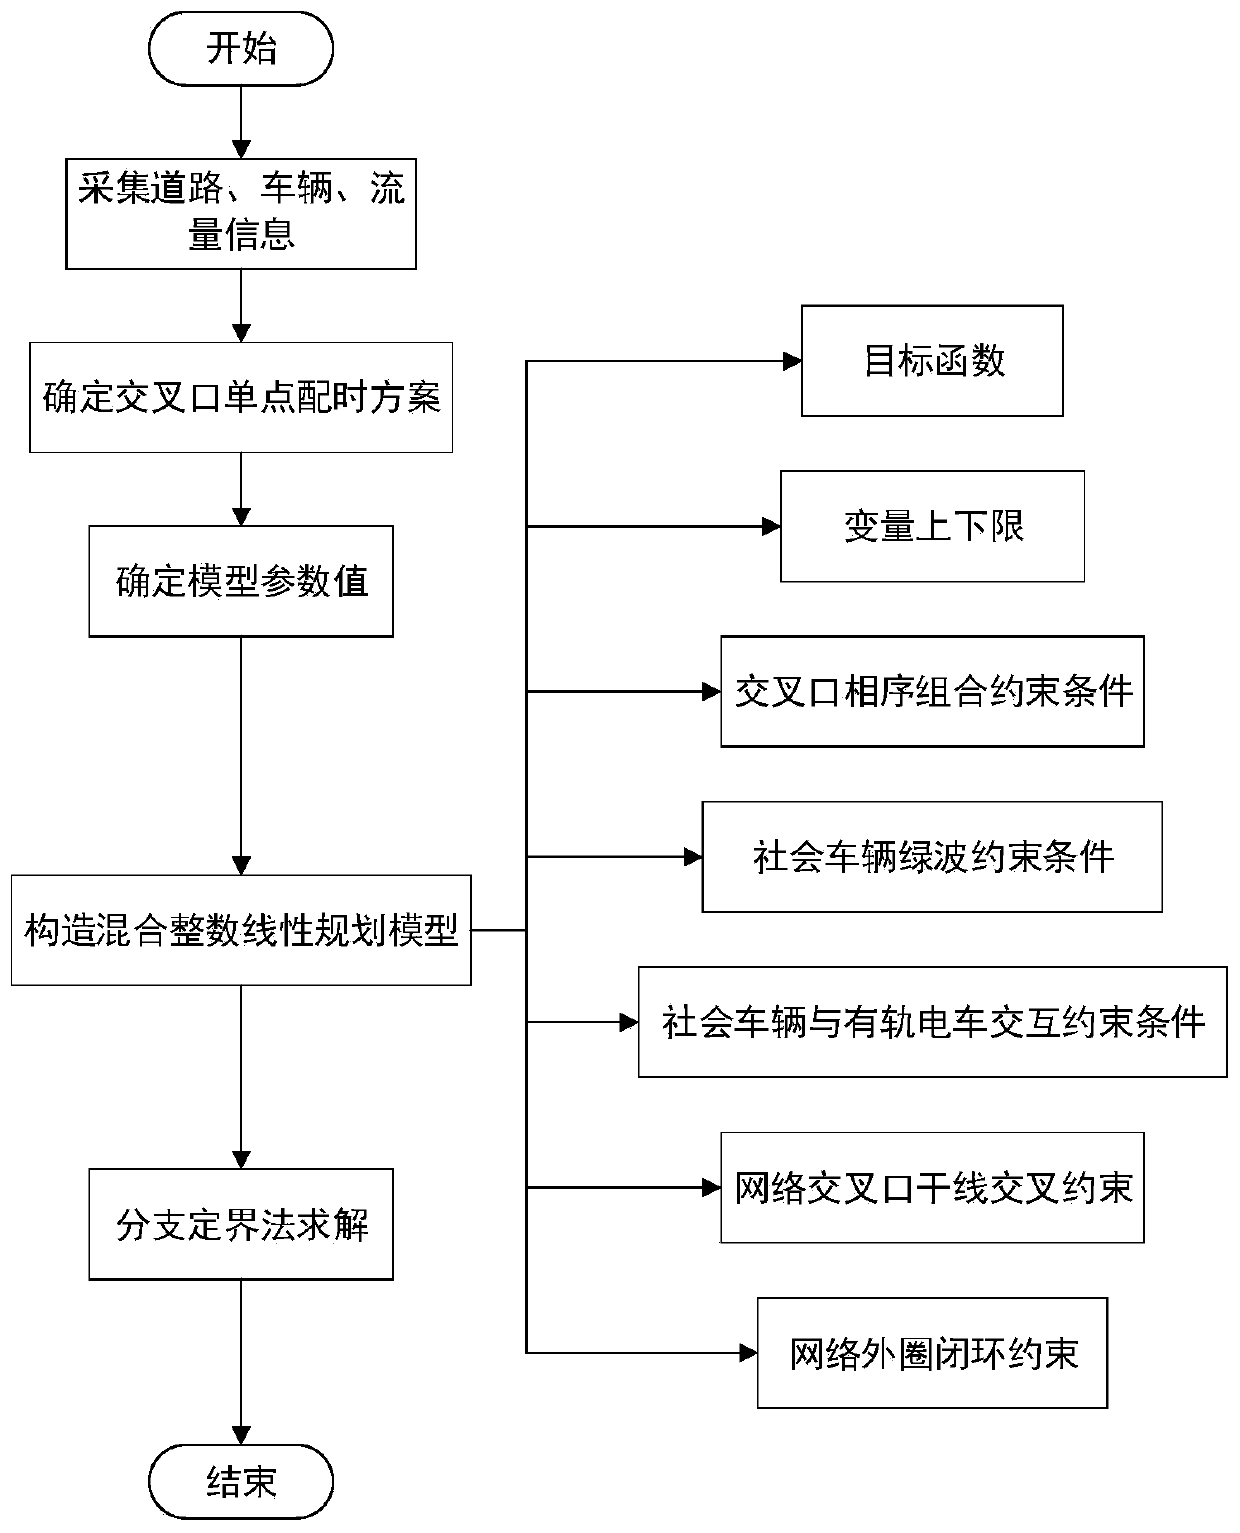 Tramcar network green wave coordination control method and device